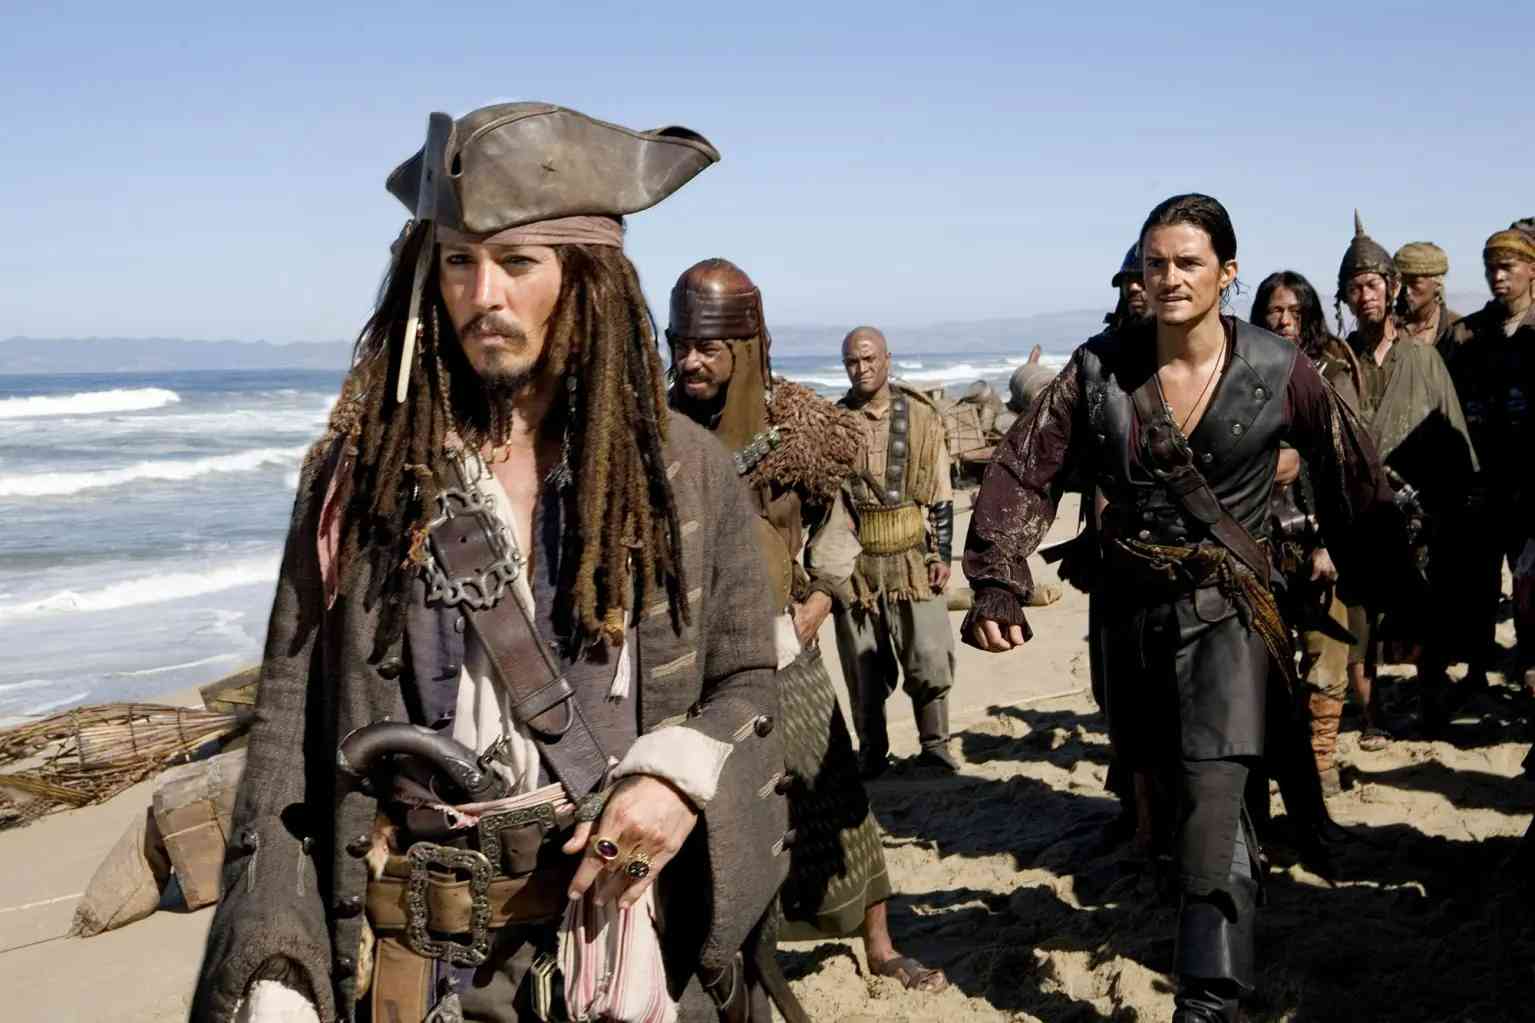 Pirates-of-the-Caribbean:-At-World's-End-in-Spain